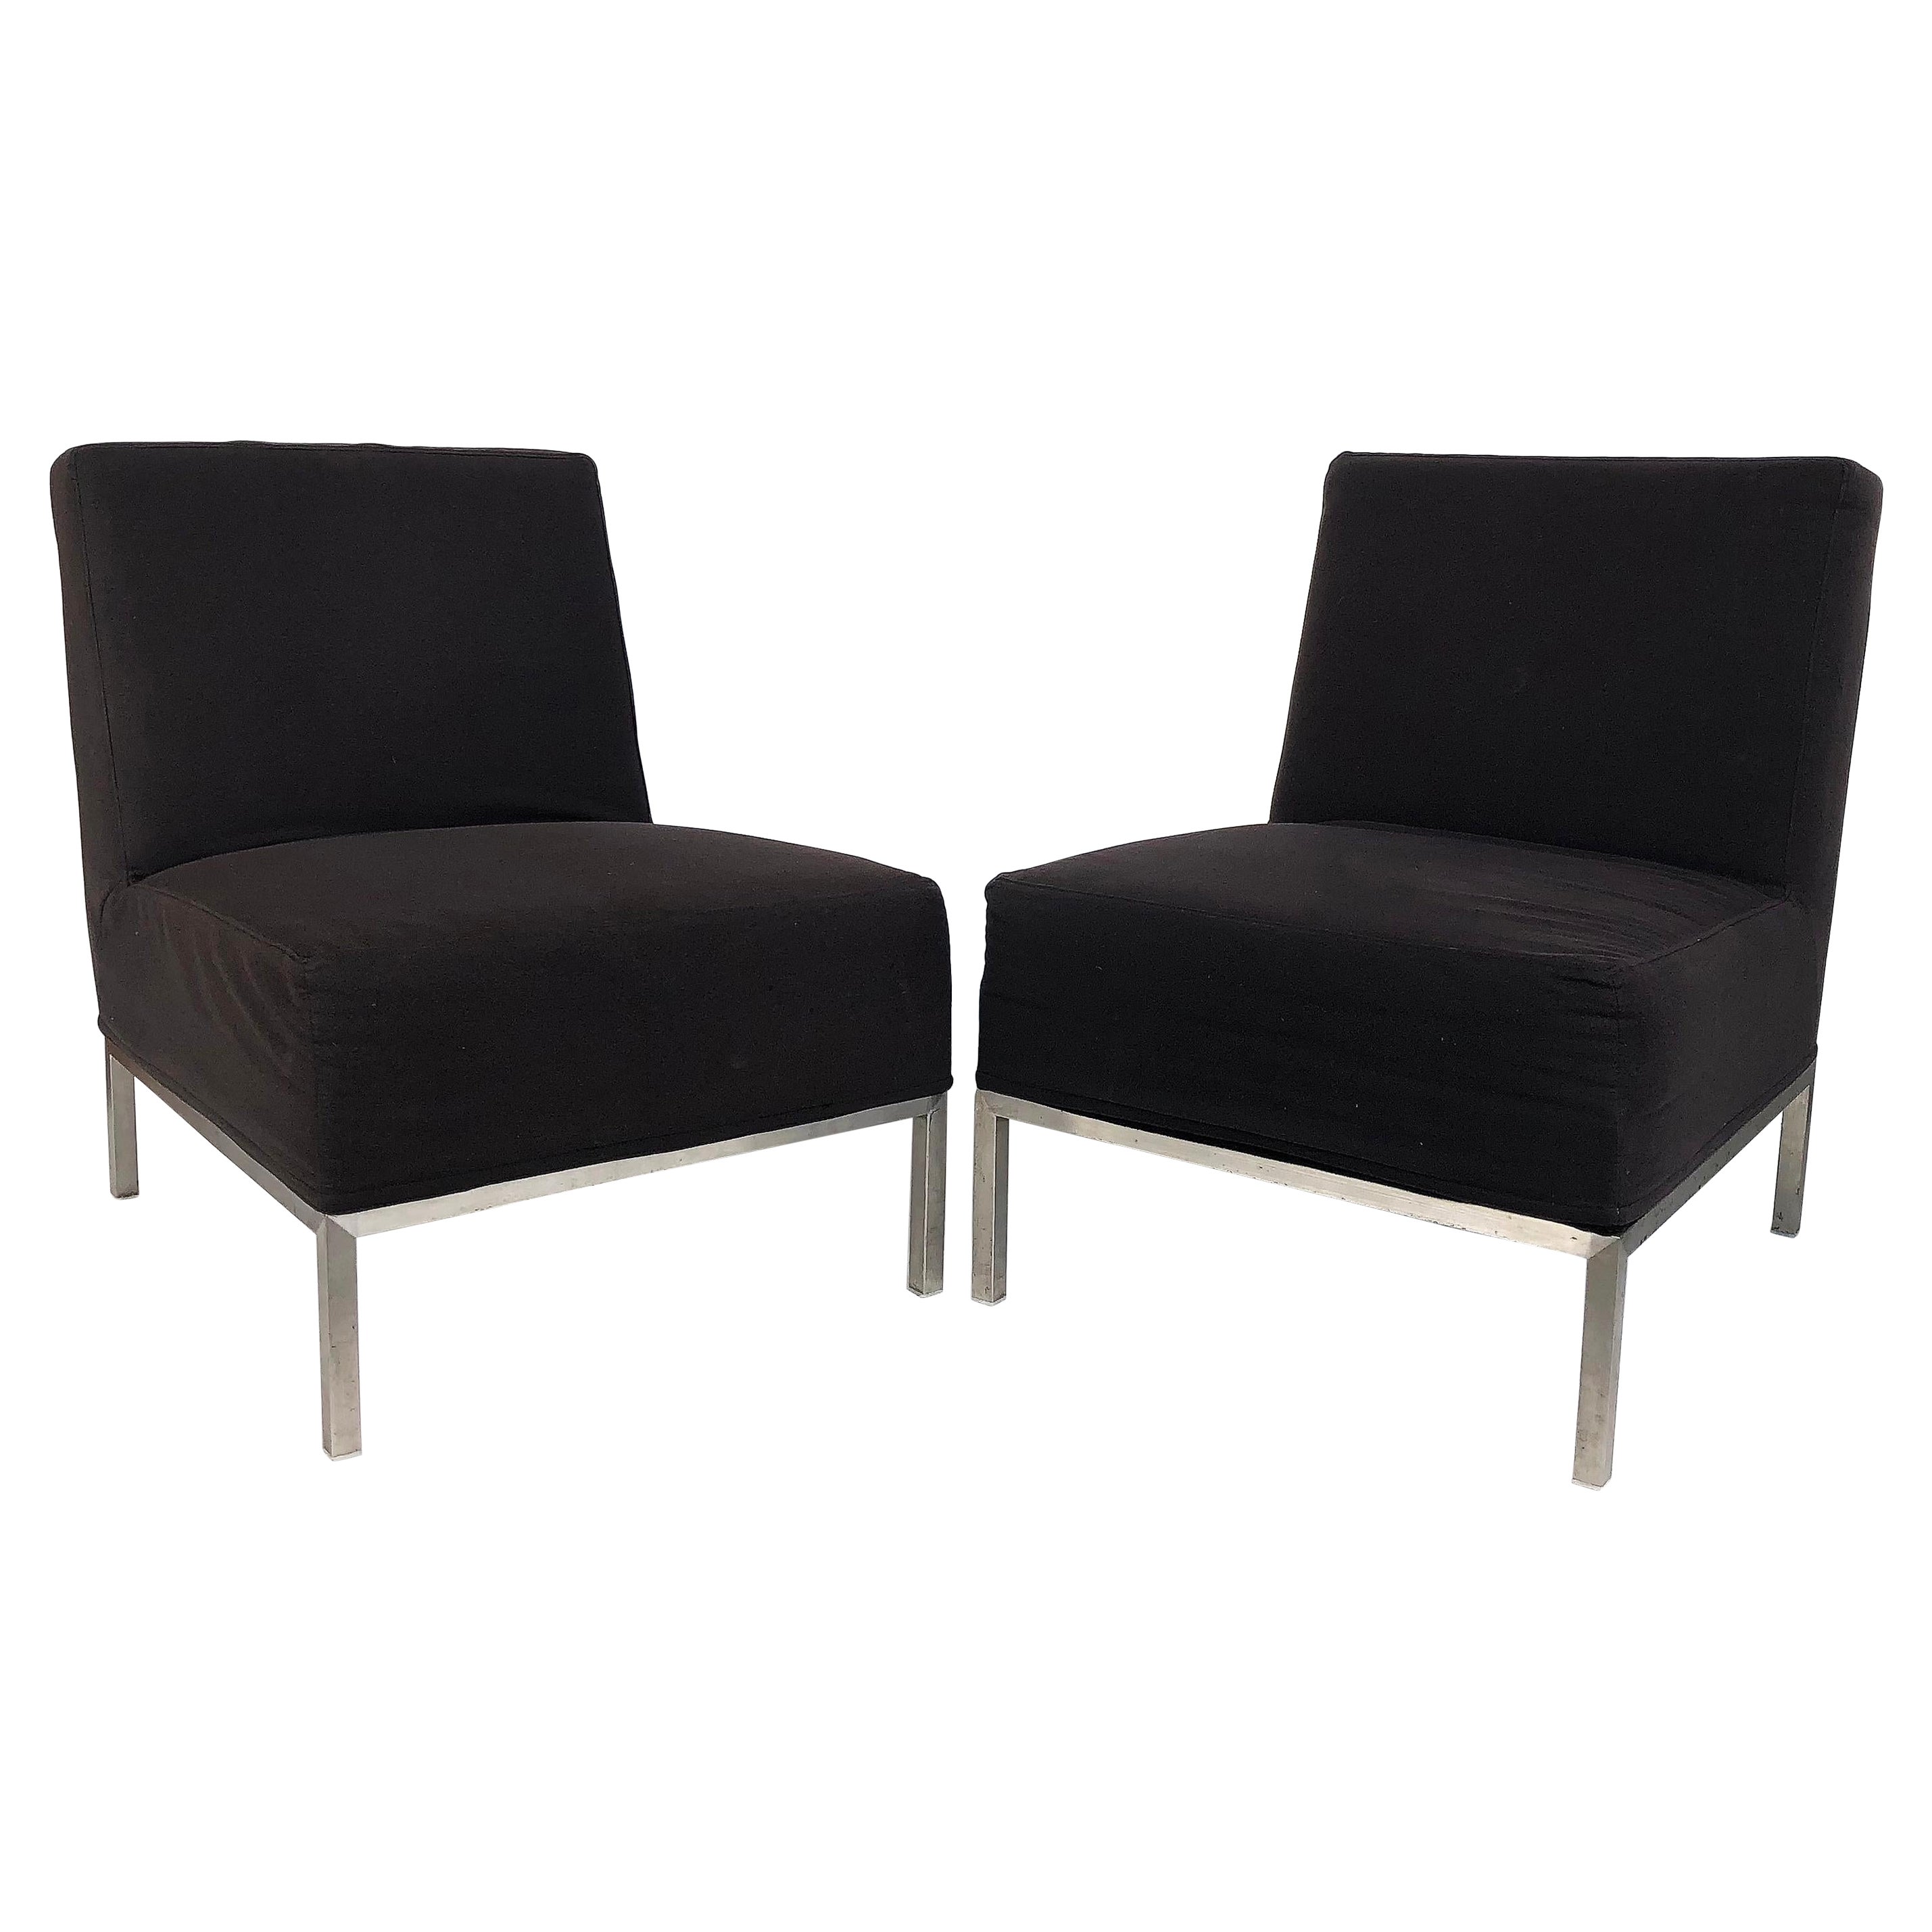 Mid-Century Modern Slipper Chairs on Stainless Steel Frames, Pair For Sale